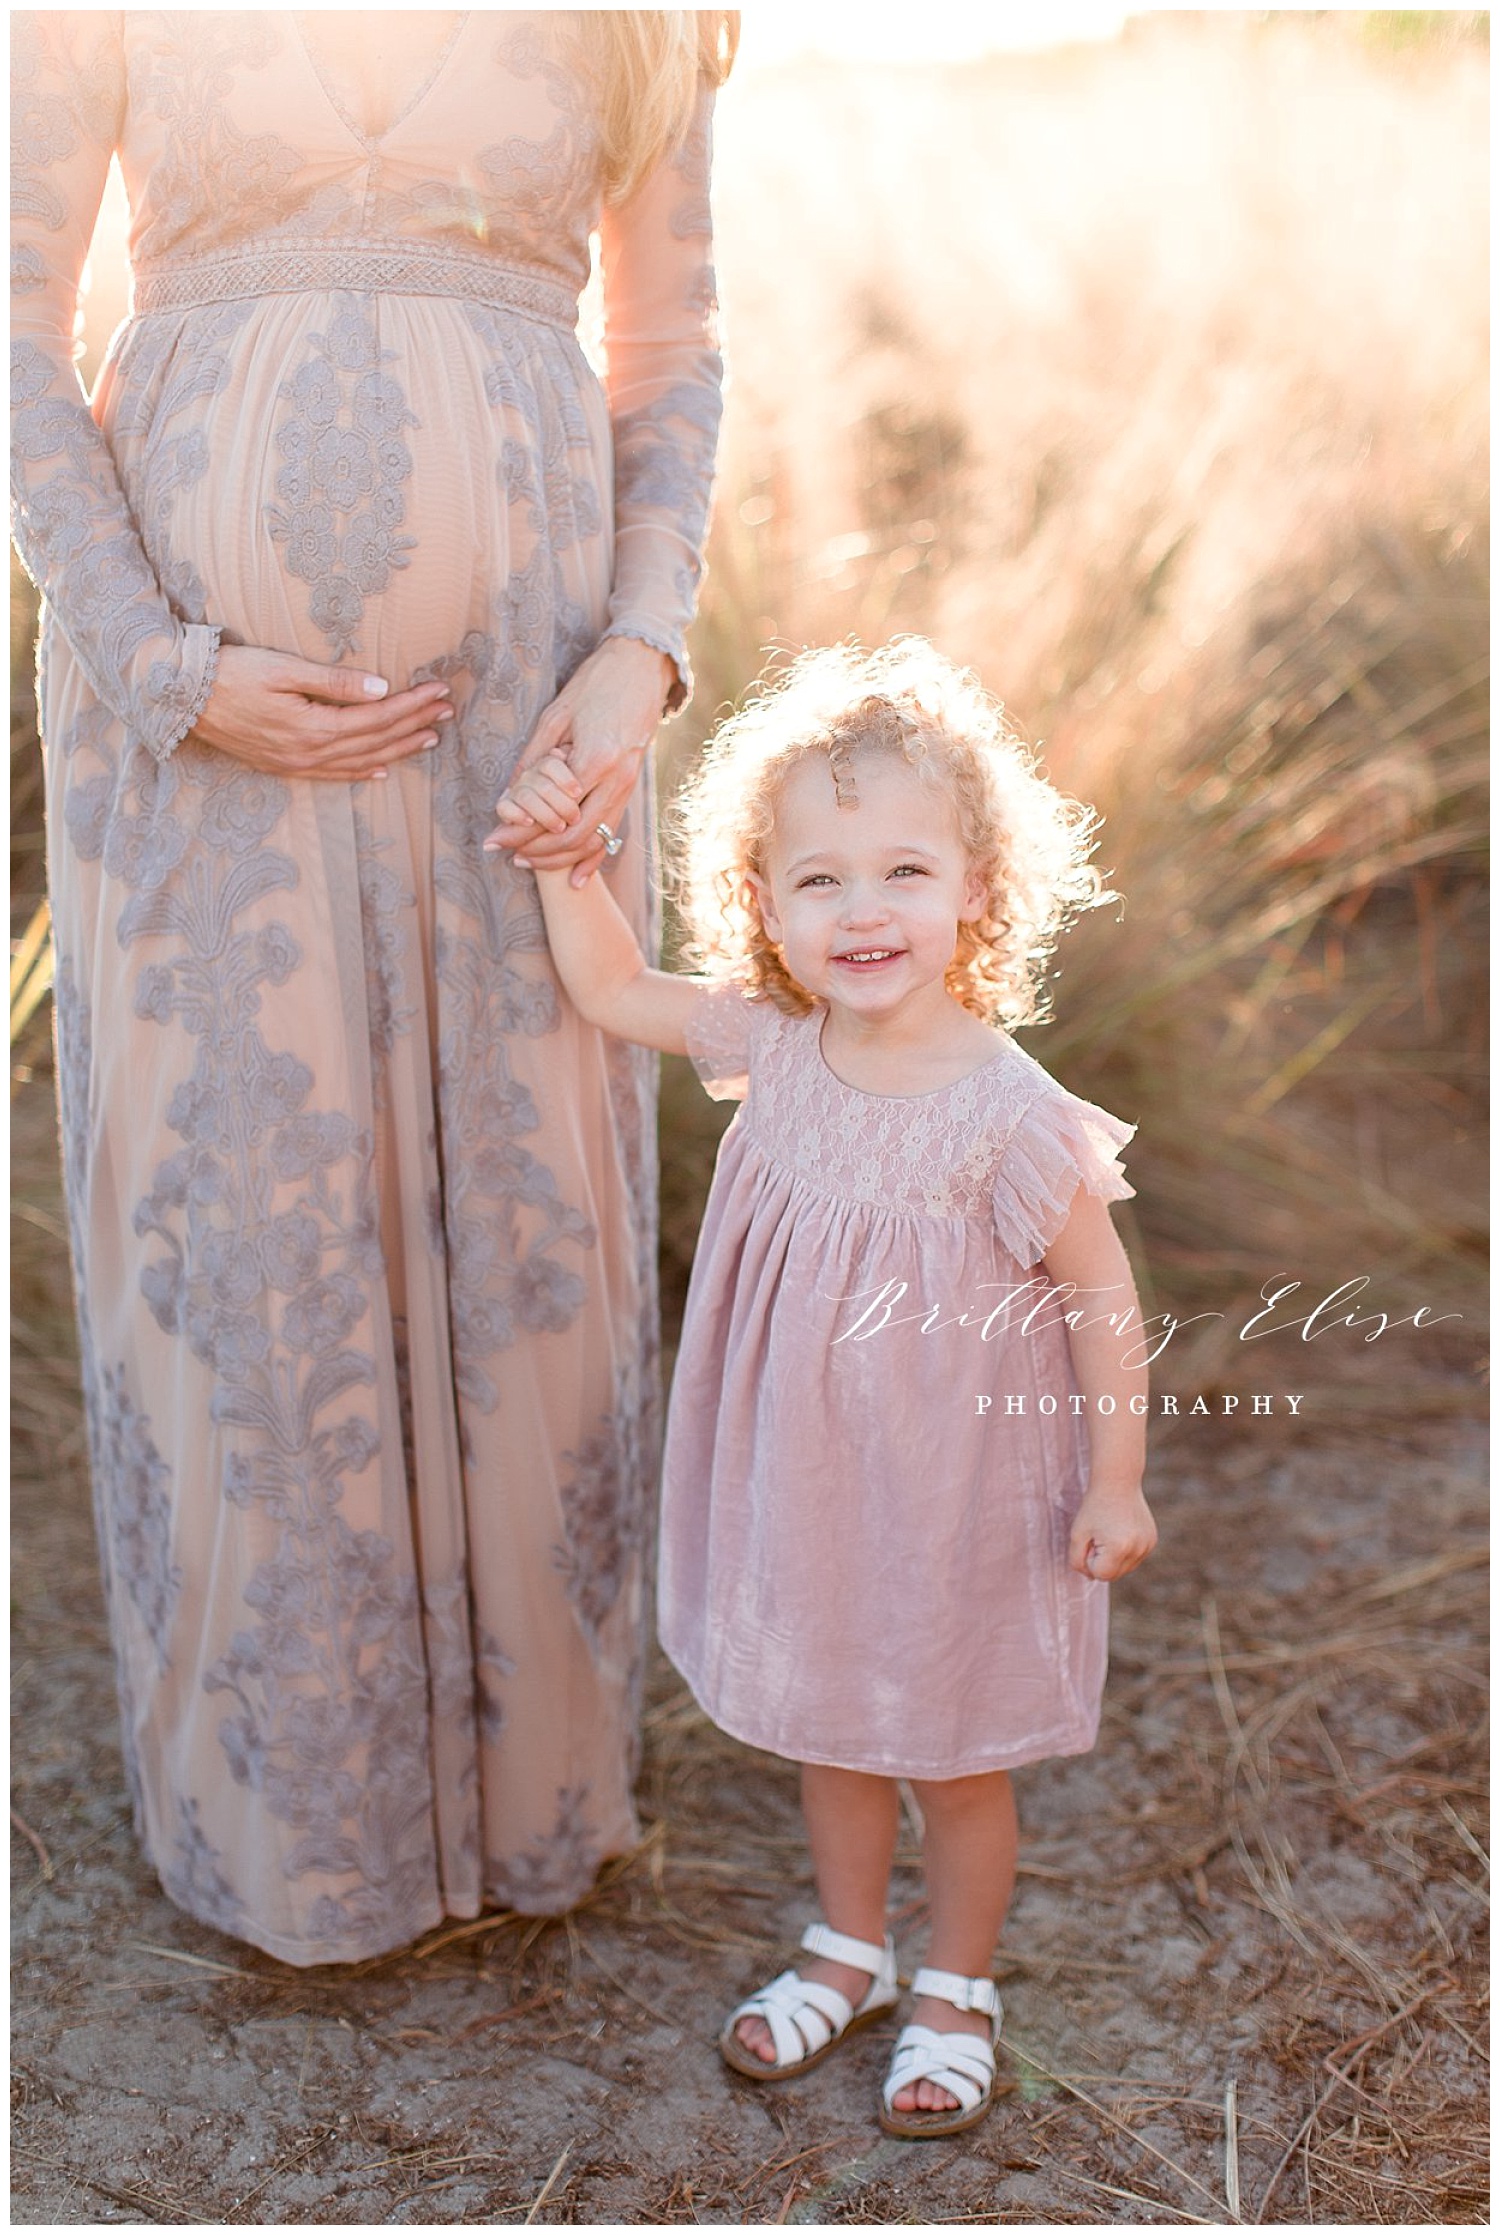 Tampa Natural Light Family and Maternity Photographer